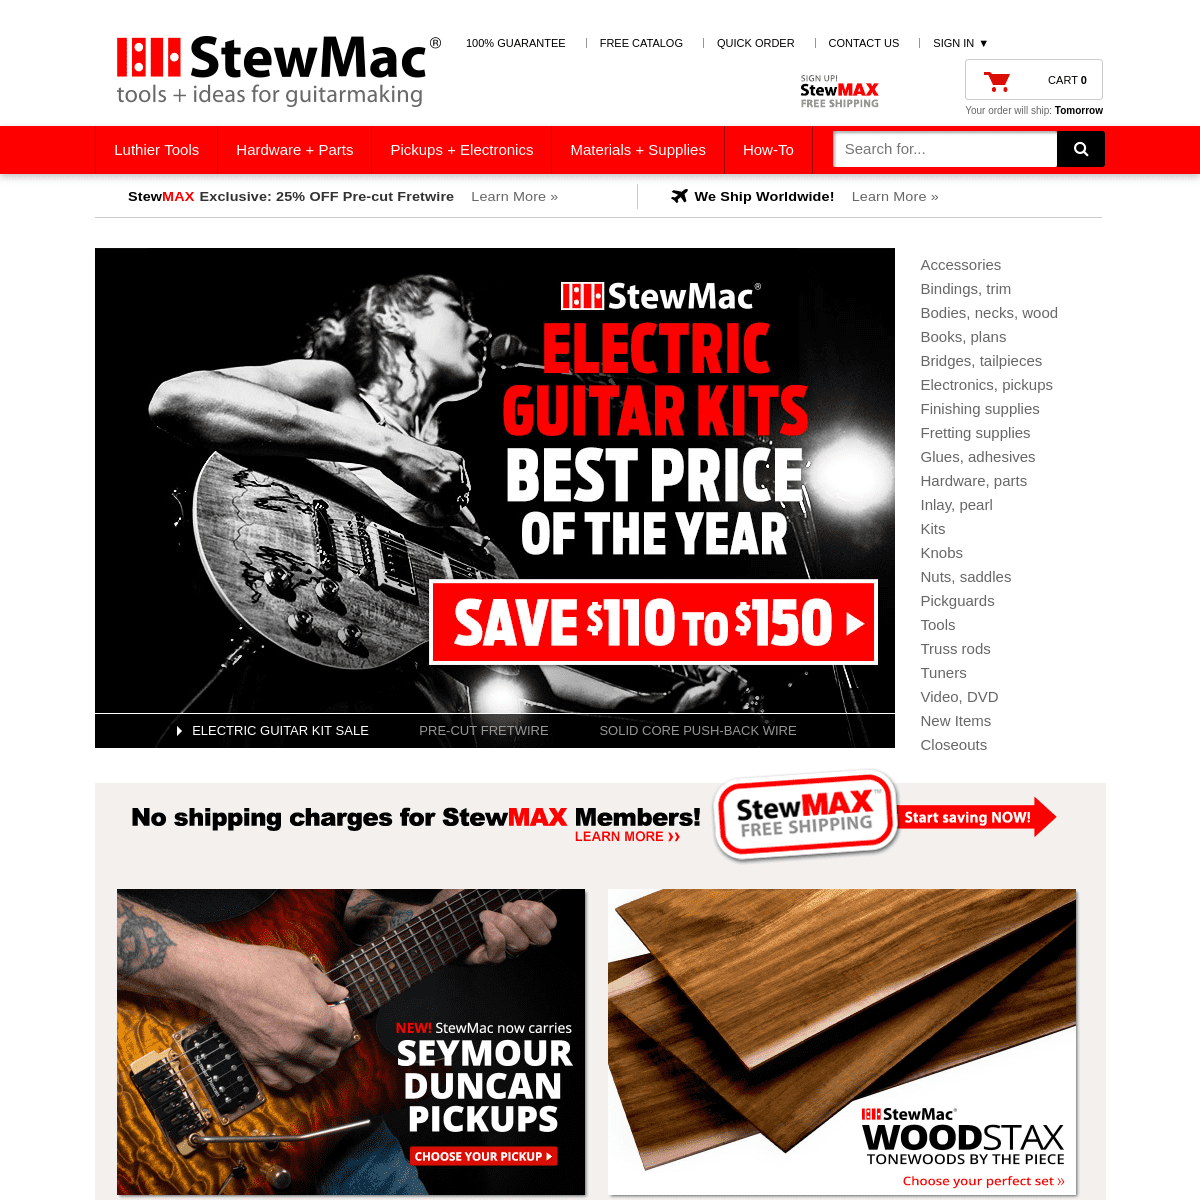 A complete backup of stewmac.com